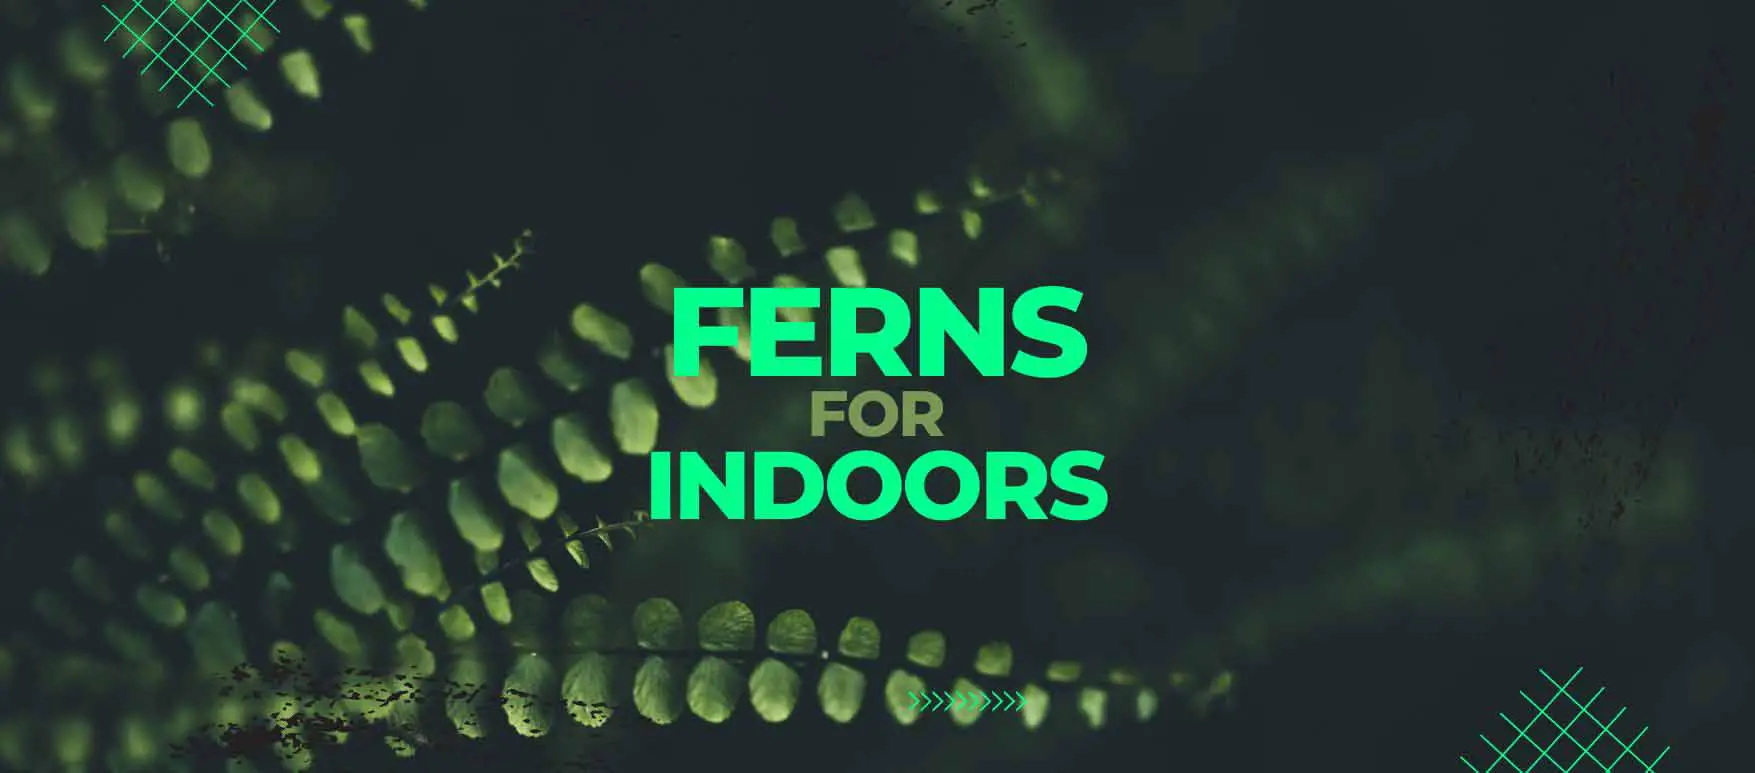 Types of best indoor ferns with pictures